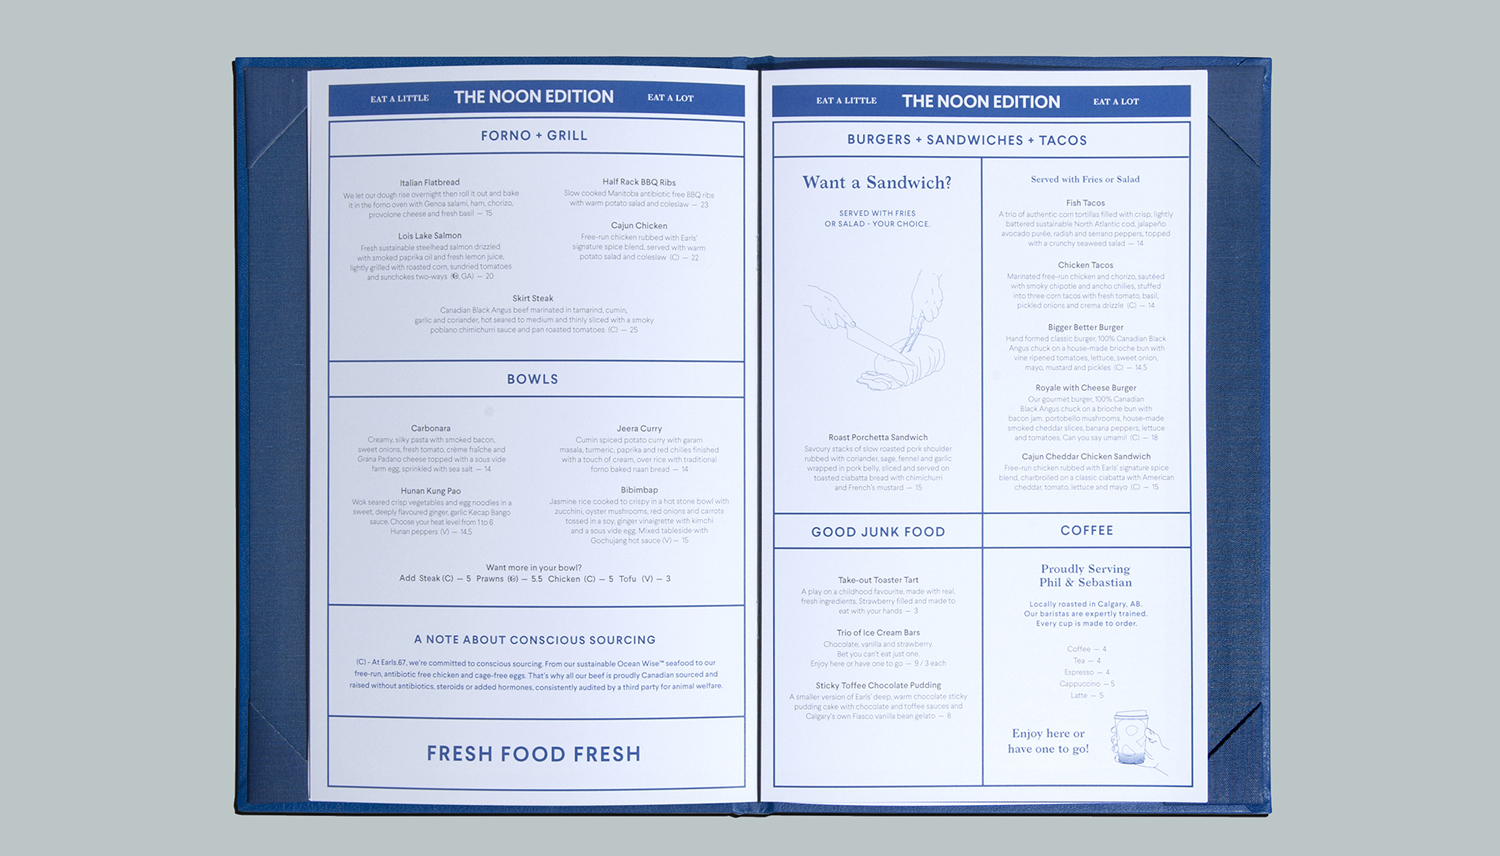 Menu spread designed by Glasfurd & Walker for US and Canadian restaurant chain prototype Earls.67